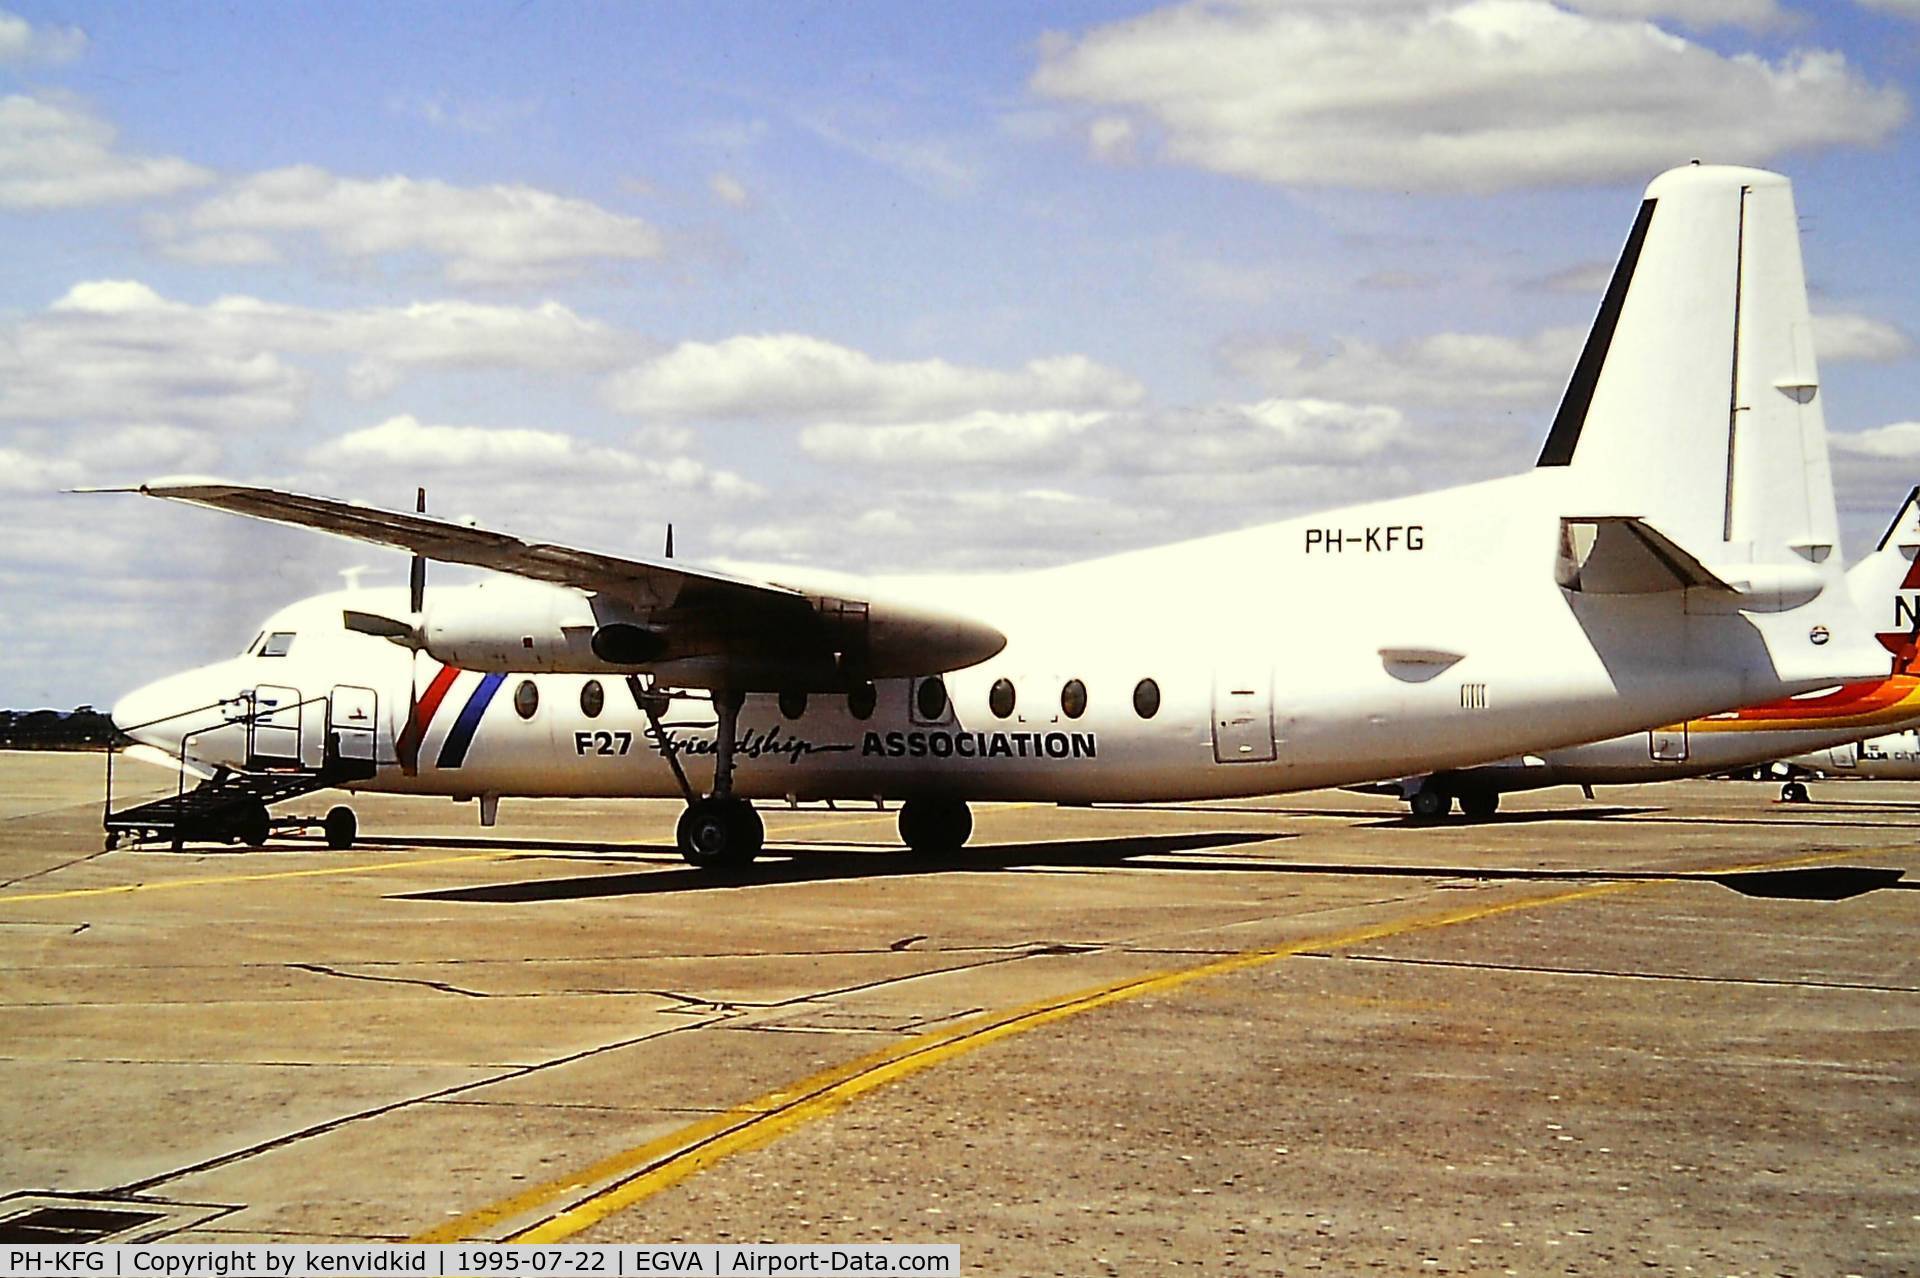 PH-KFG, 1964 Fokker F-27-200 Friendship C/N 10249, At the 1995 Fairford International Air Tattoo, scanned from slide.